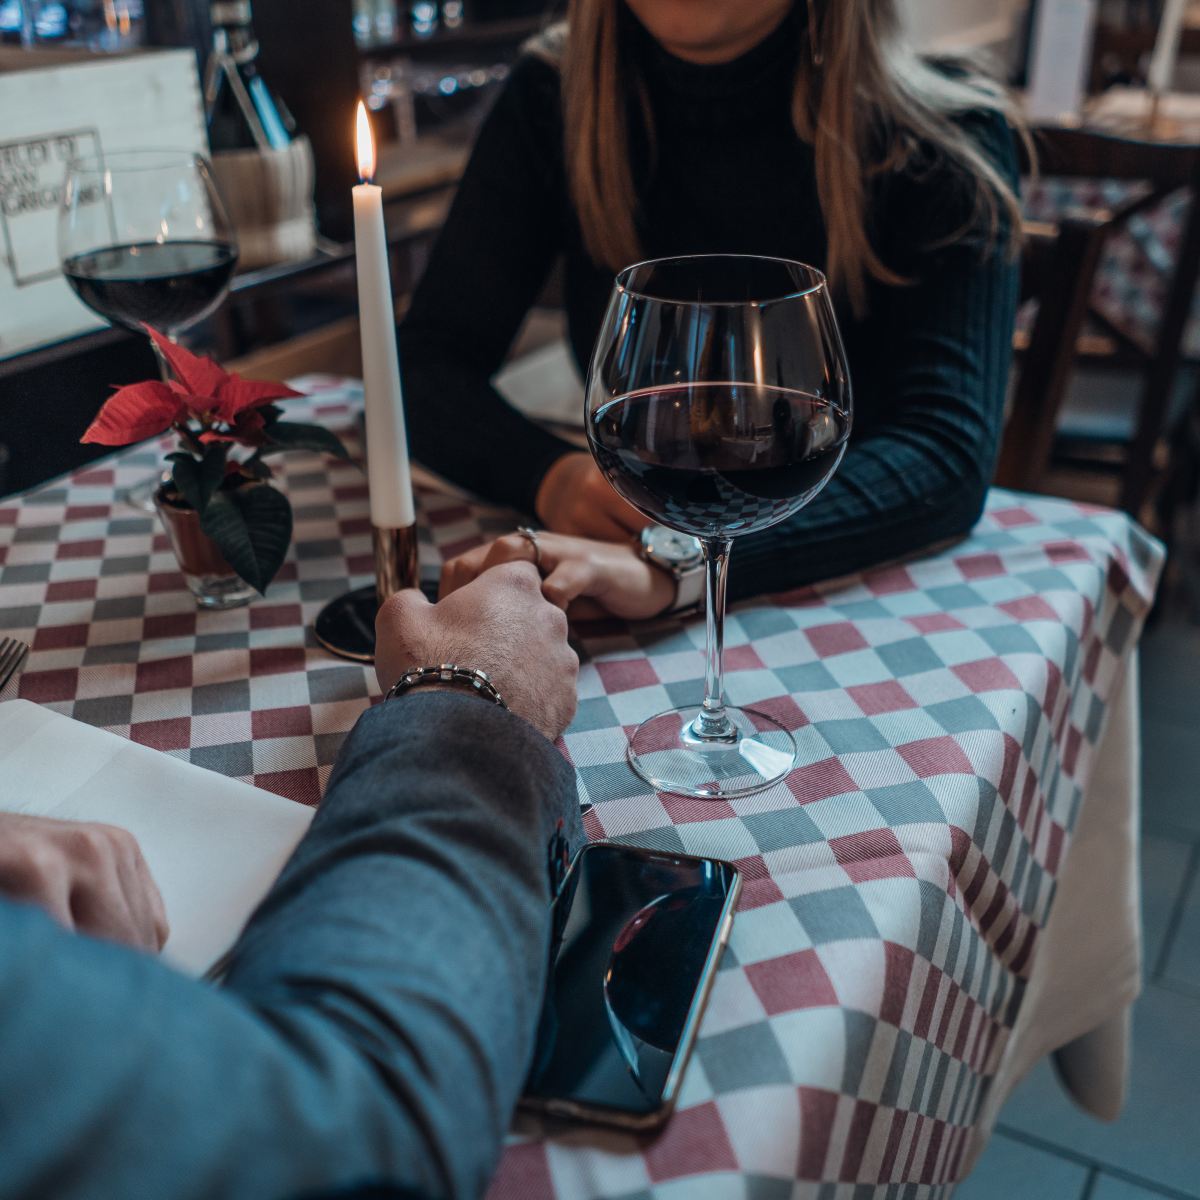 Will a bottle of wine make her fall in love?